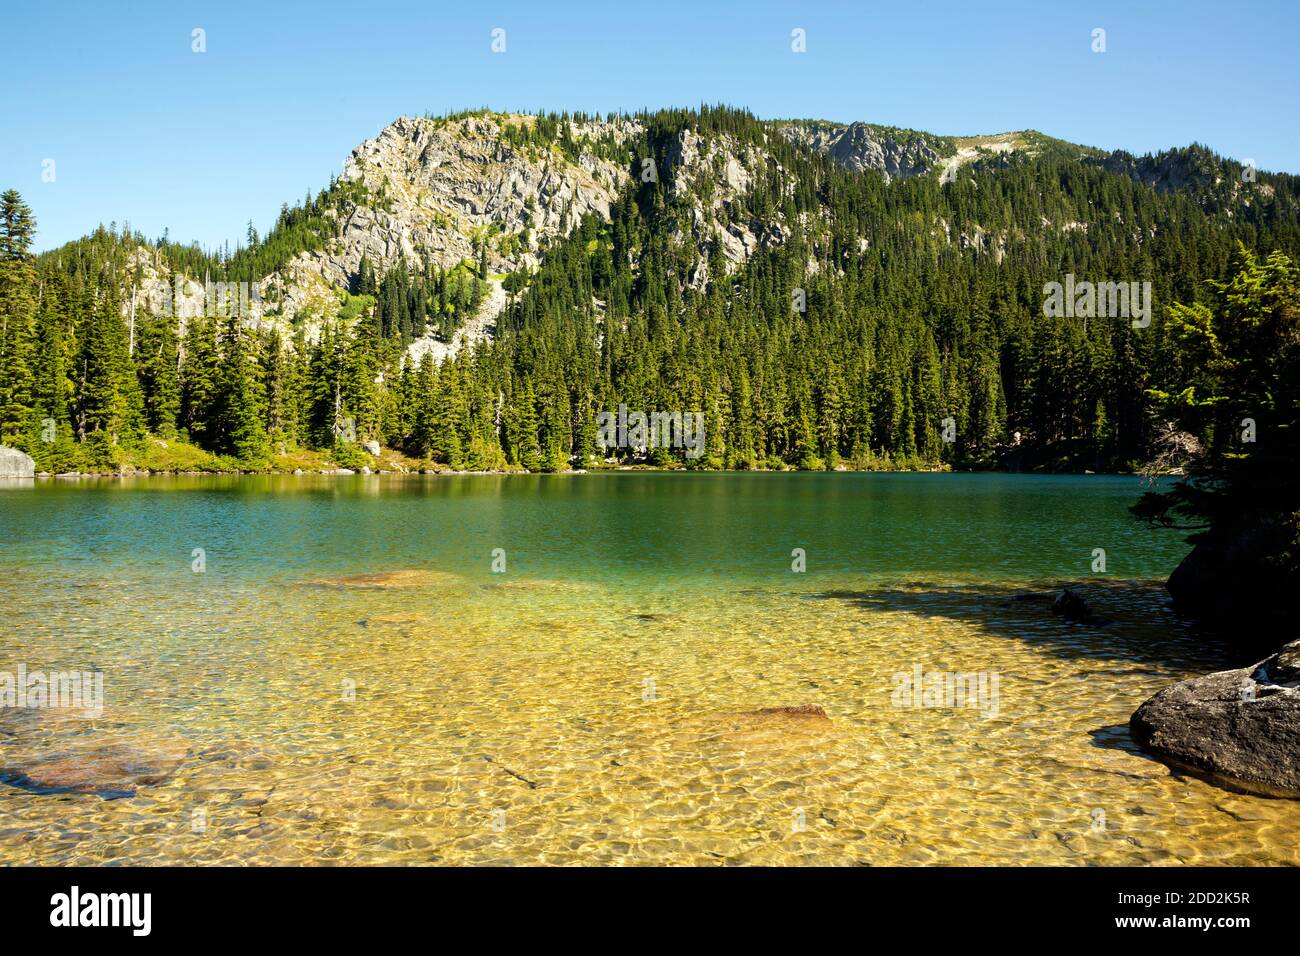 WA18472-00...WASHINGTON - Deception Lake located along the Pacific Crest Trail north of Deception Pass in the Alpine Lakes Wilderness. Stock Photo